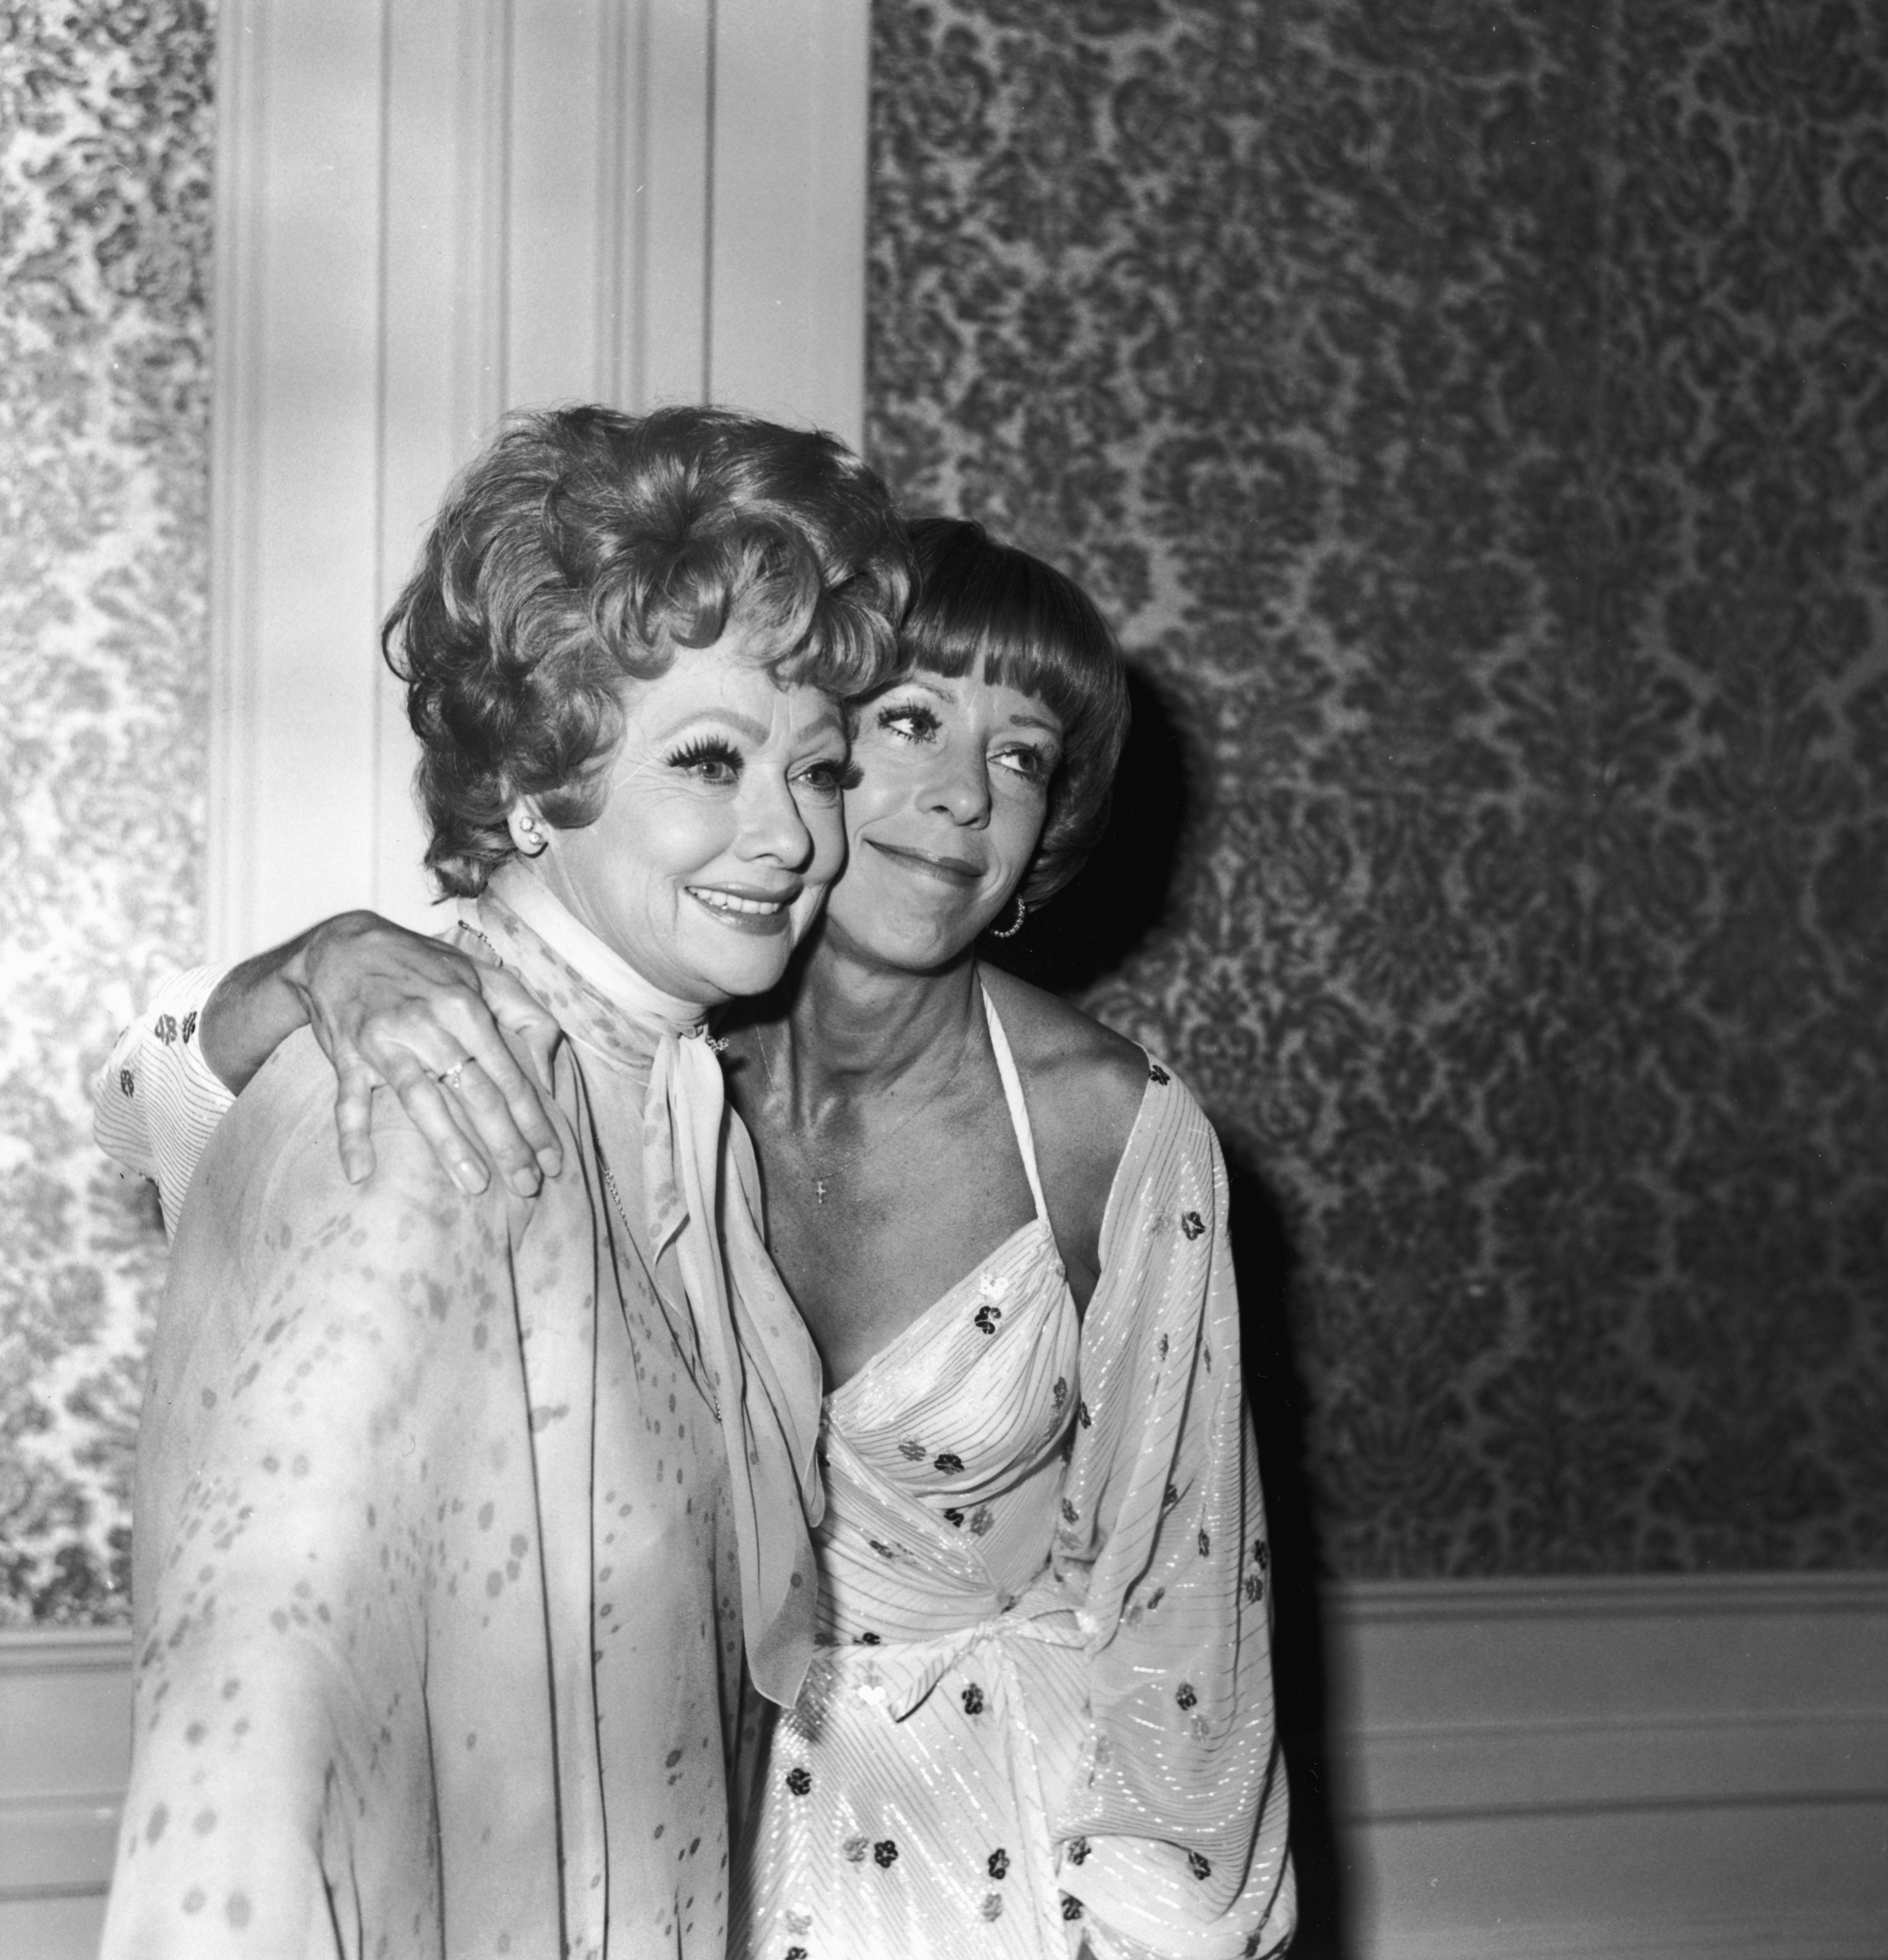 Lucille Ball and Carol Burnett in Los Angeles, California, October 1975 | Source: Getty Images